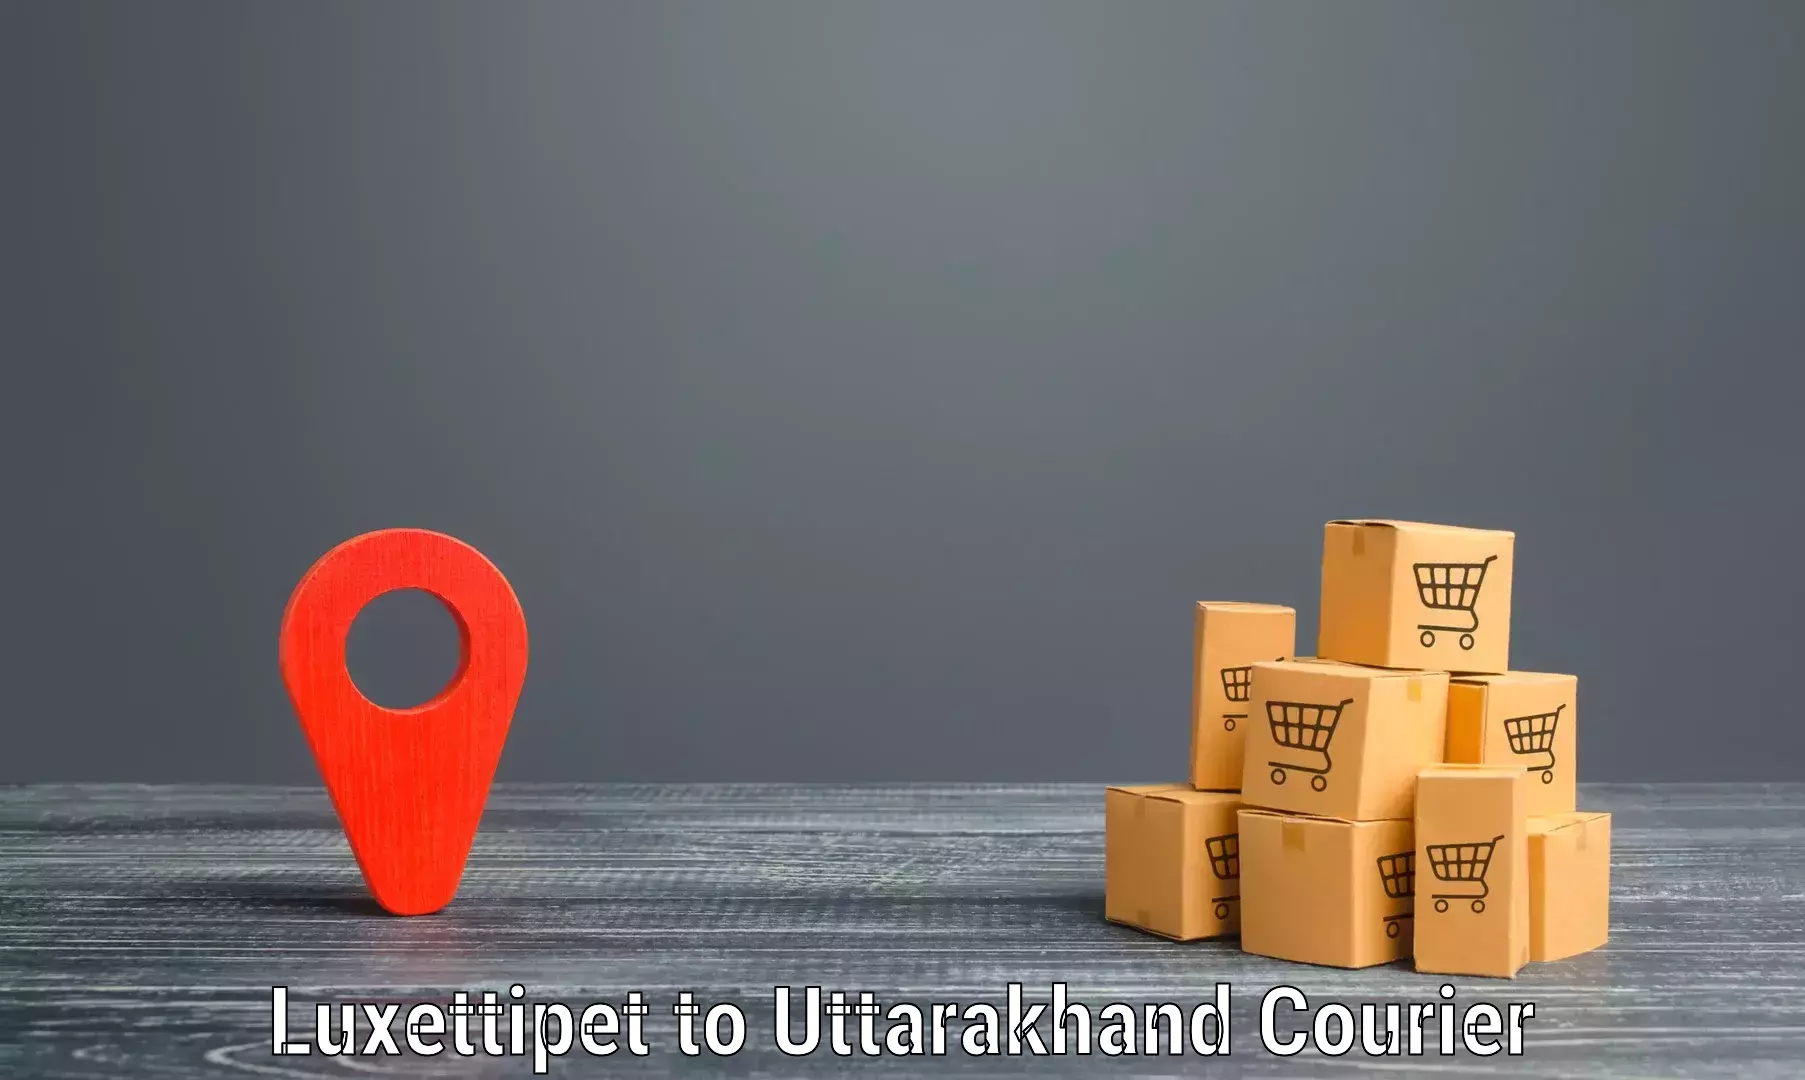 Express package handling Luxettipet to Joshimath